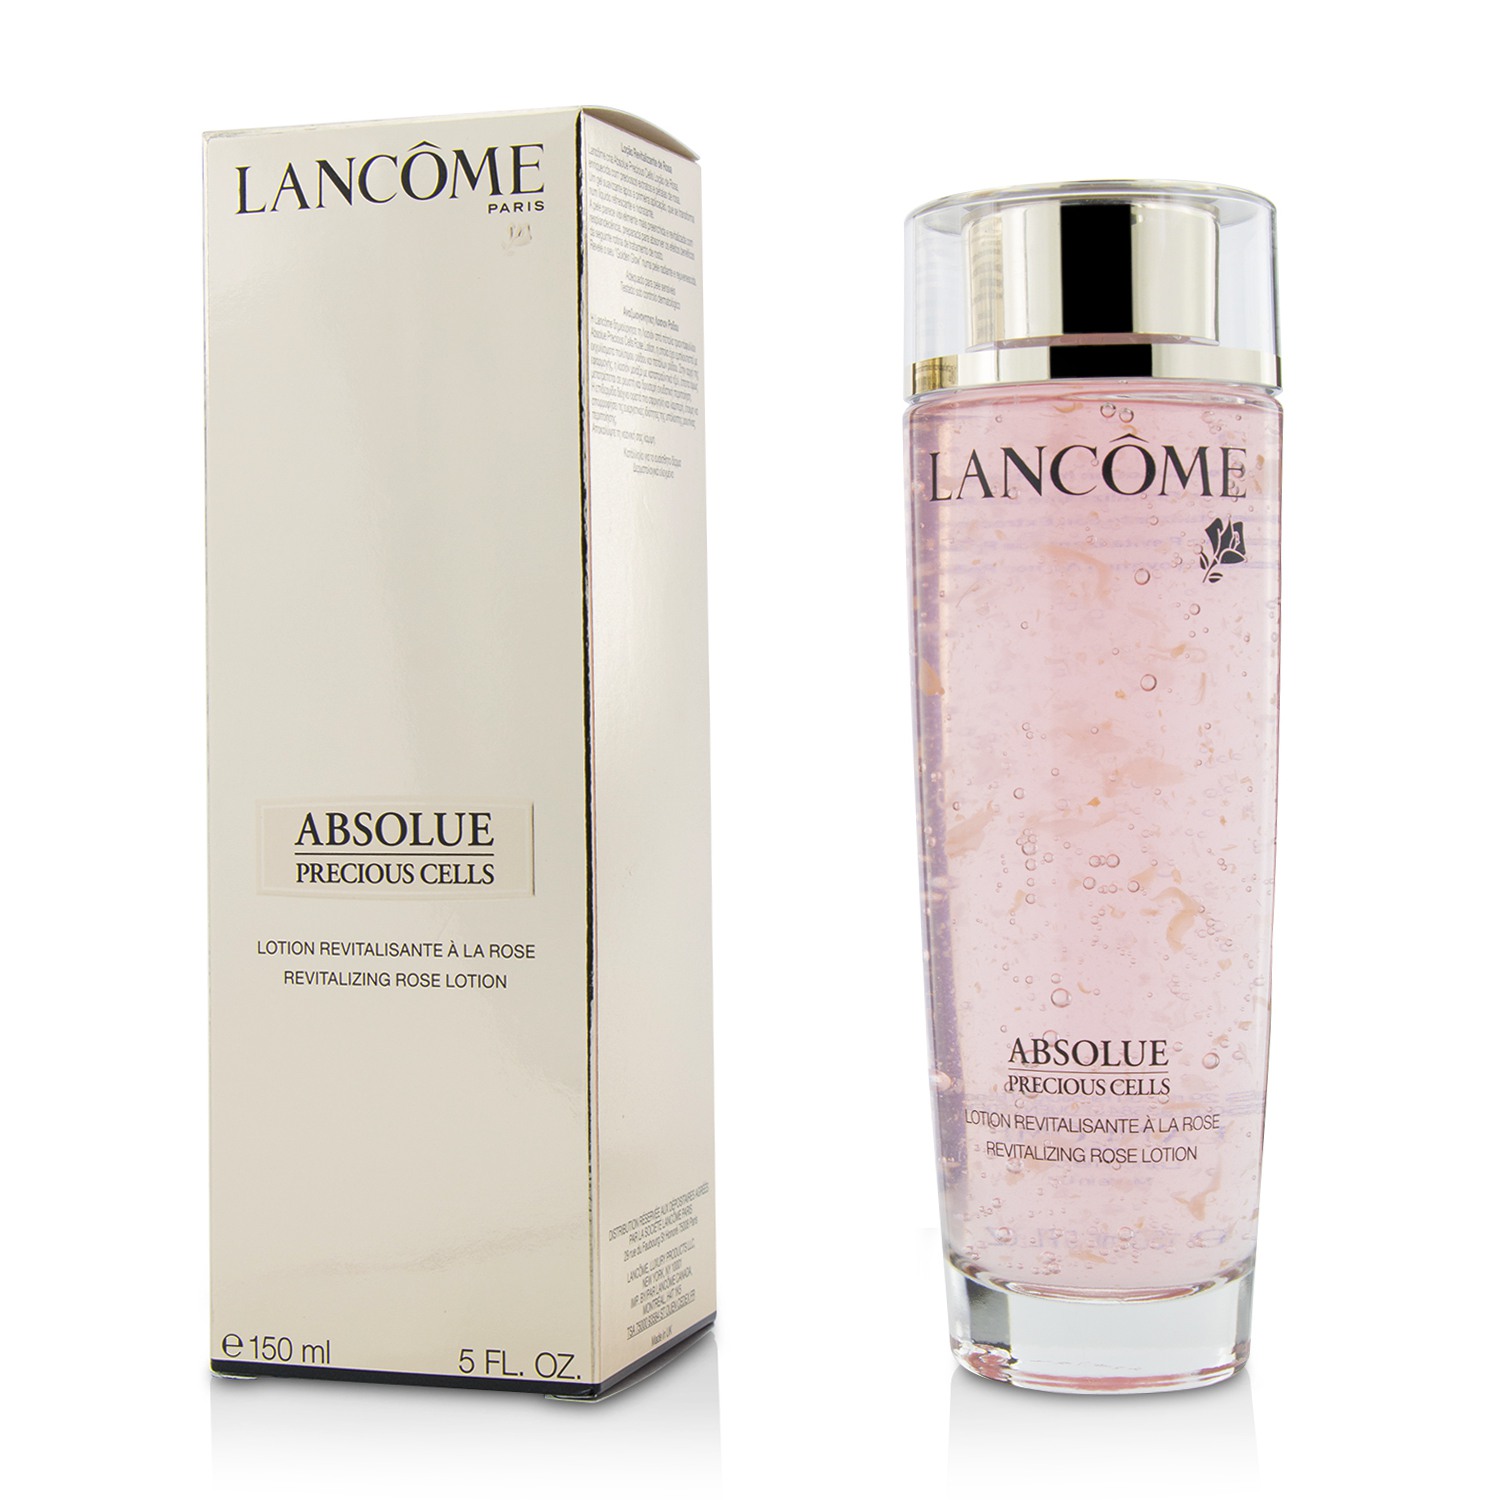 Absolue Precious Cells Revitalizing Rose Lotion Lancome Image